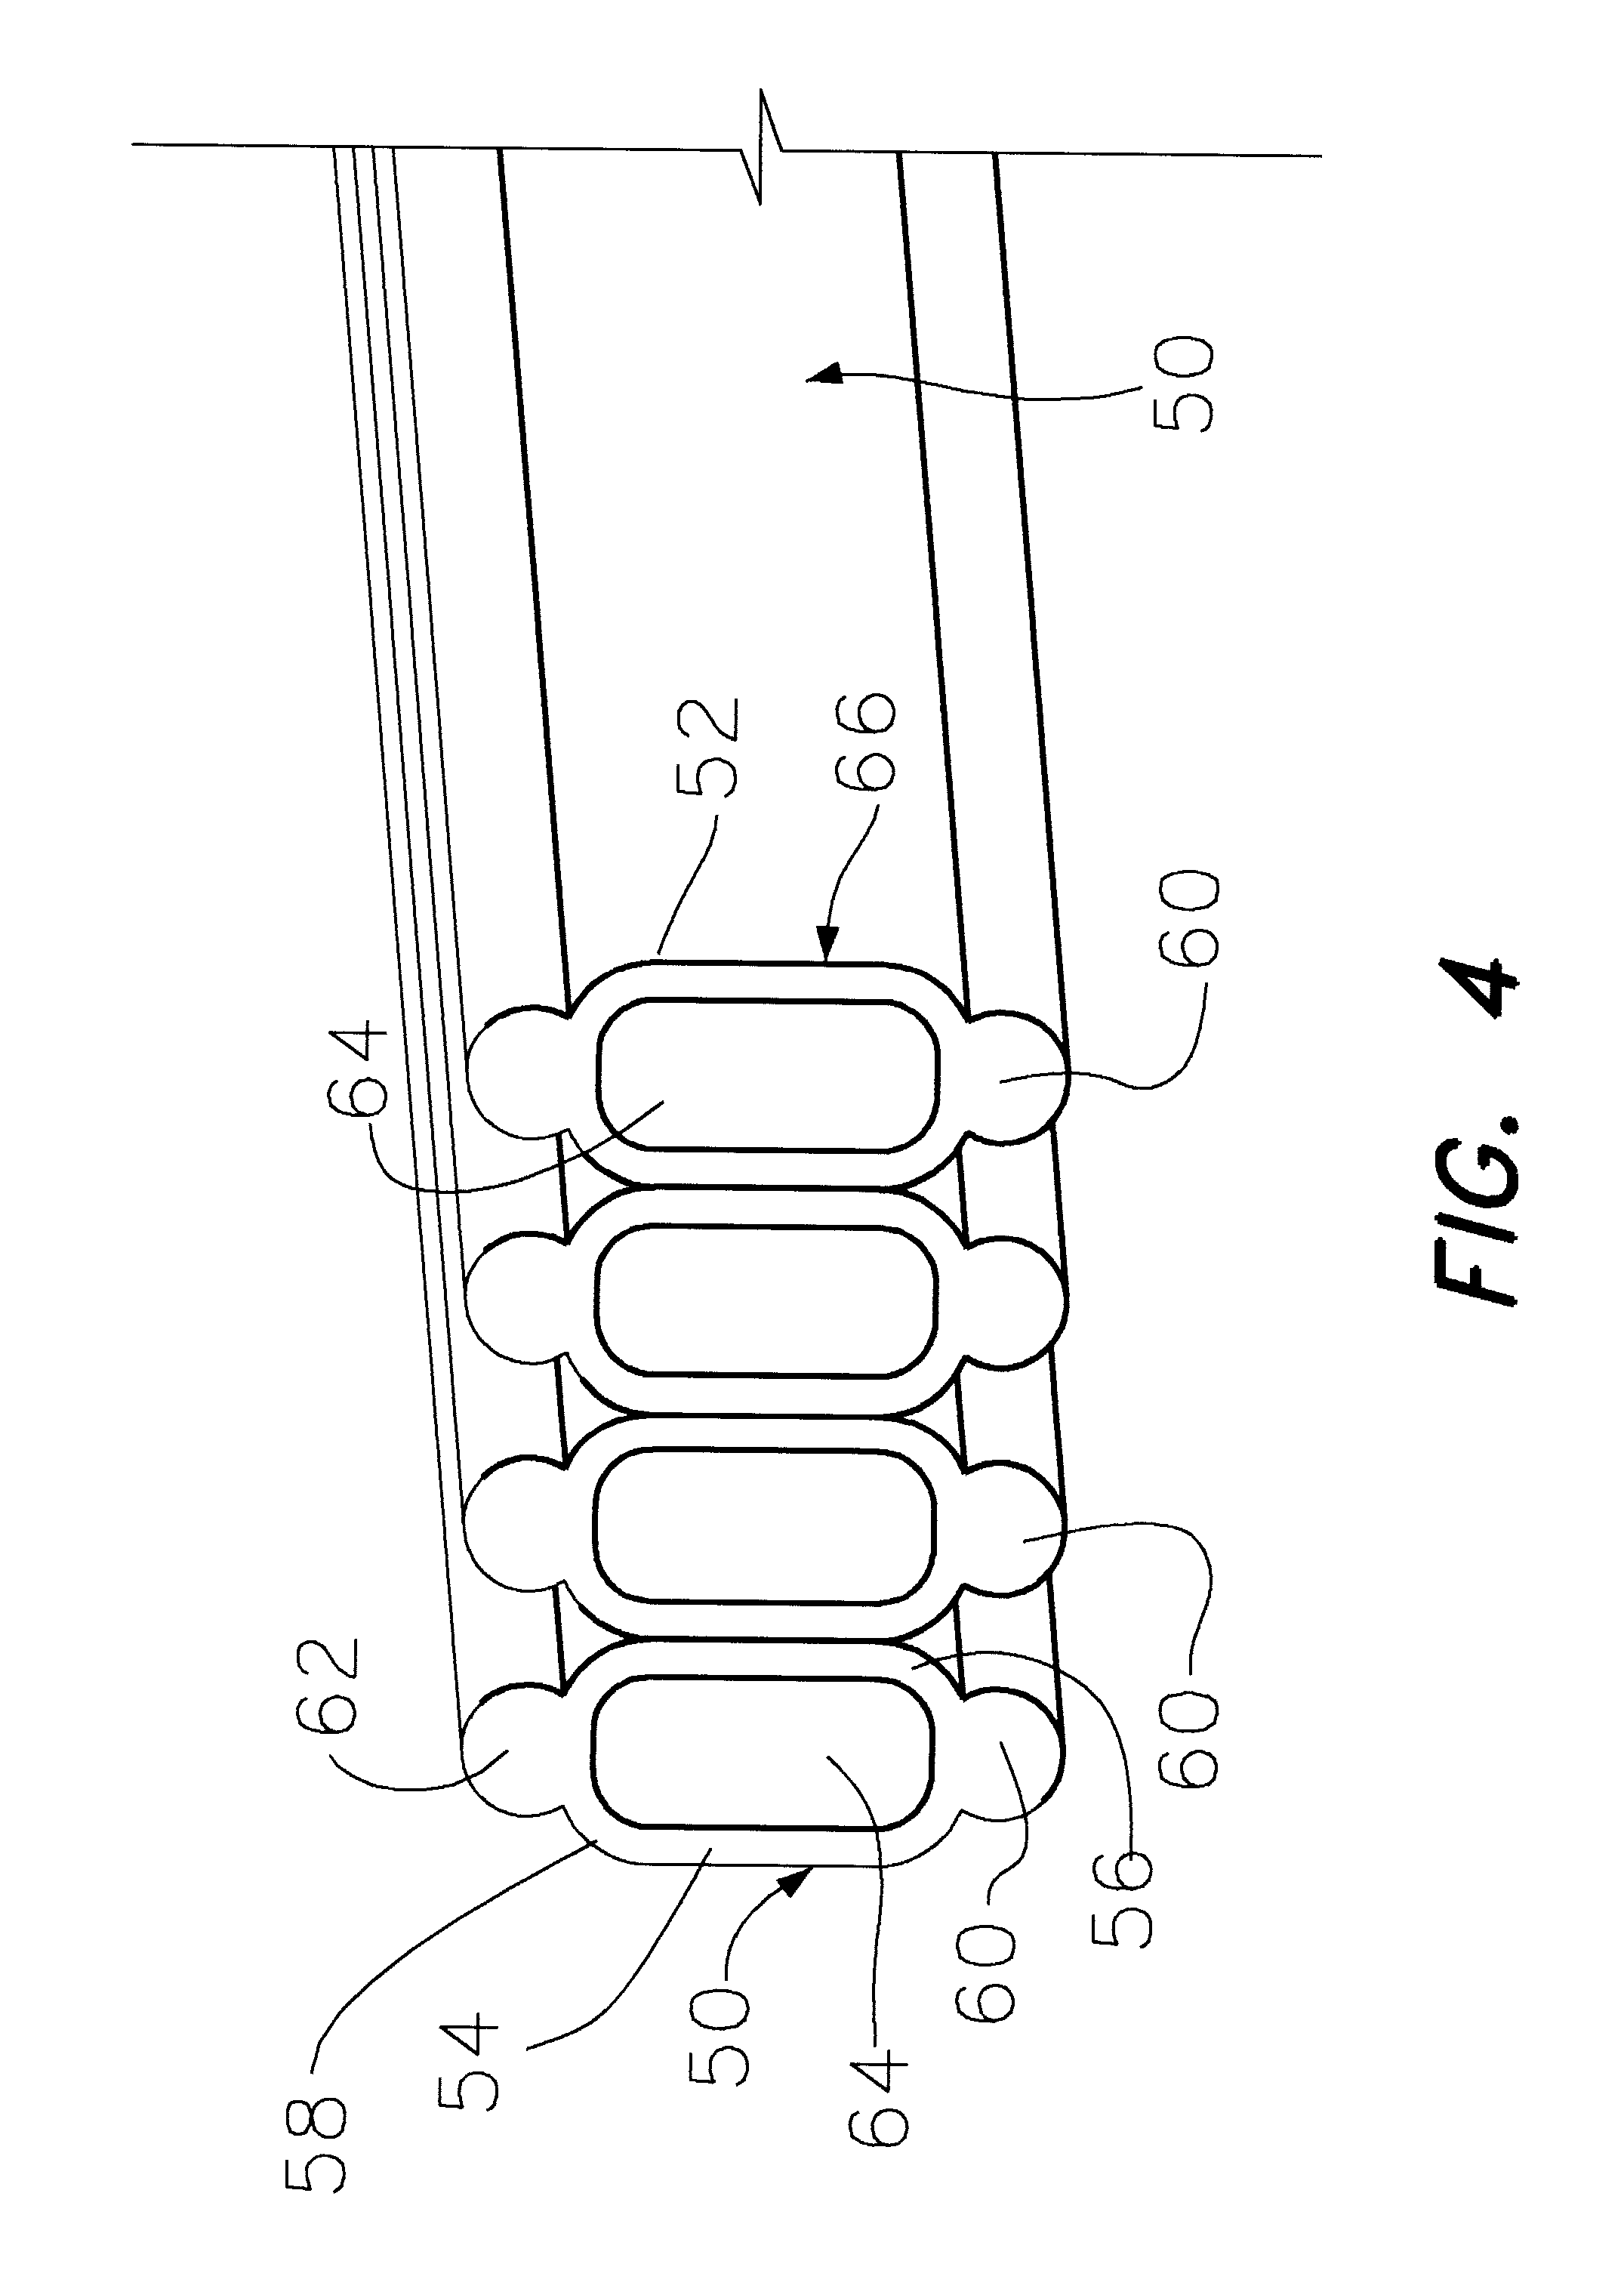 Tube for conveying a liquid